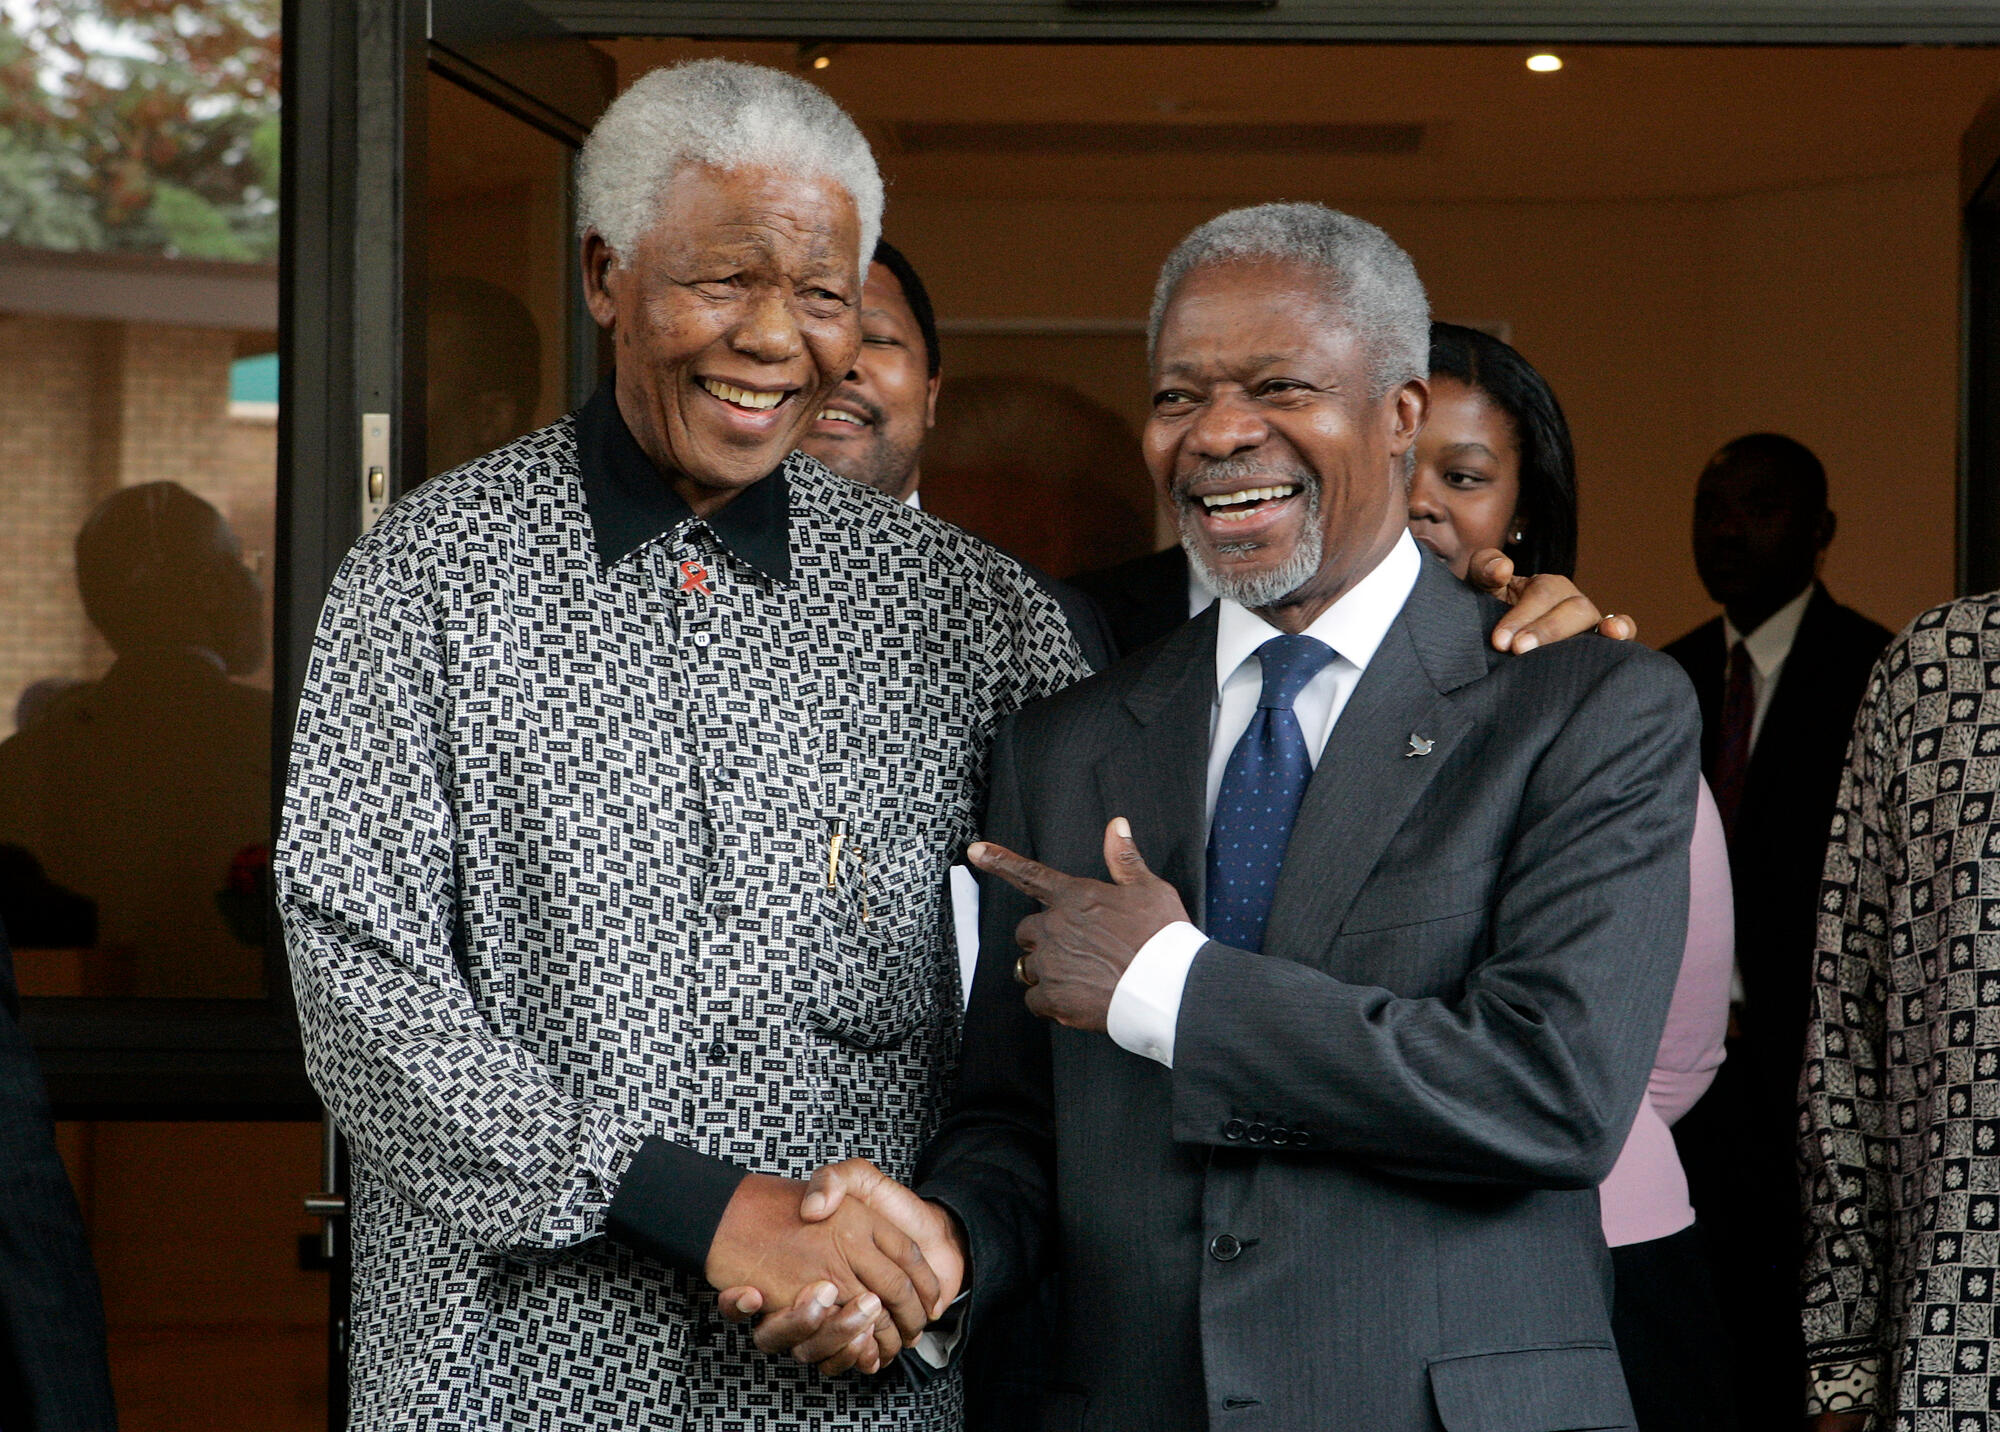 Secretary-General Kofi Annan (right) meets with former South African President Nelson Mandela in Houghton, Johannesburg, South Africa today.